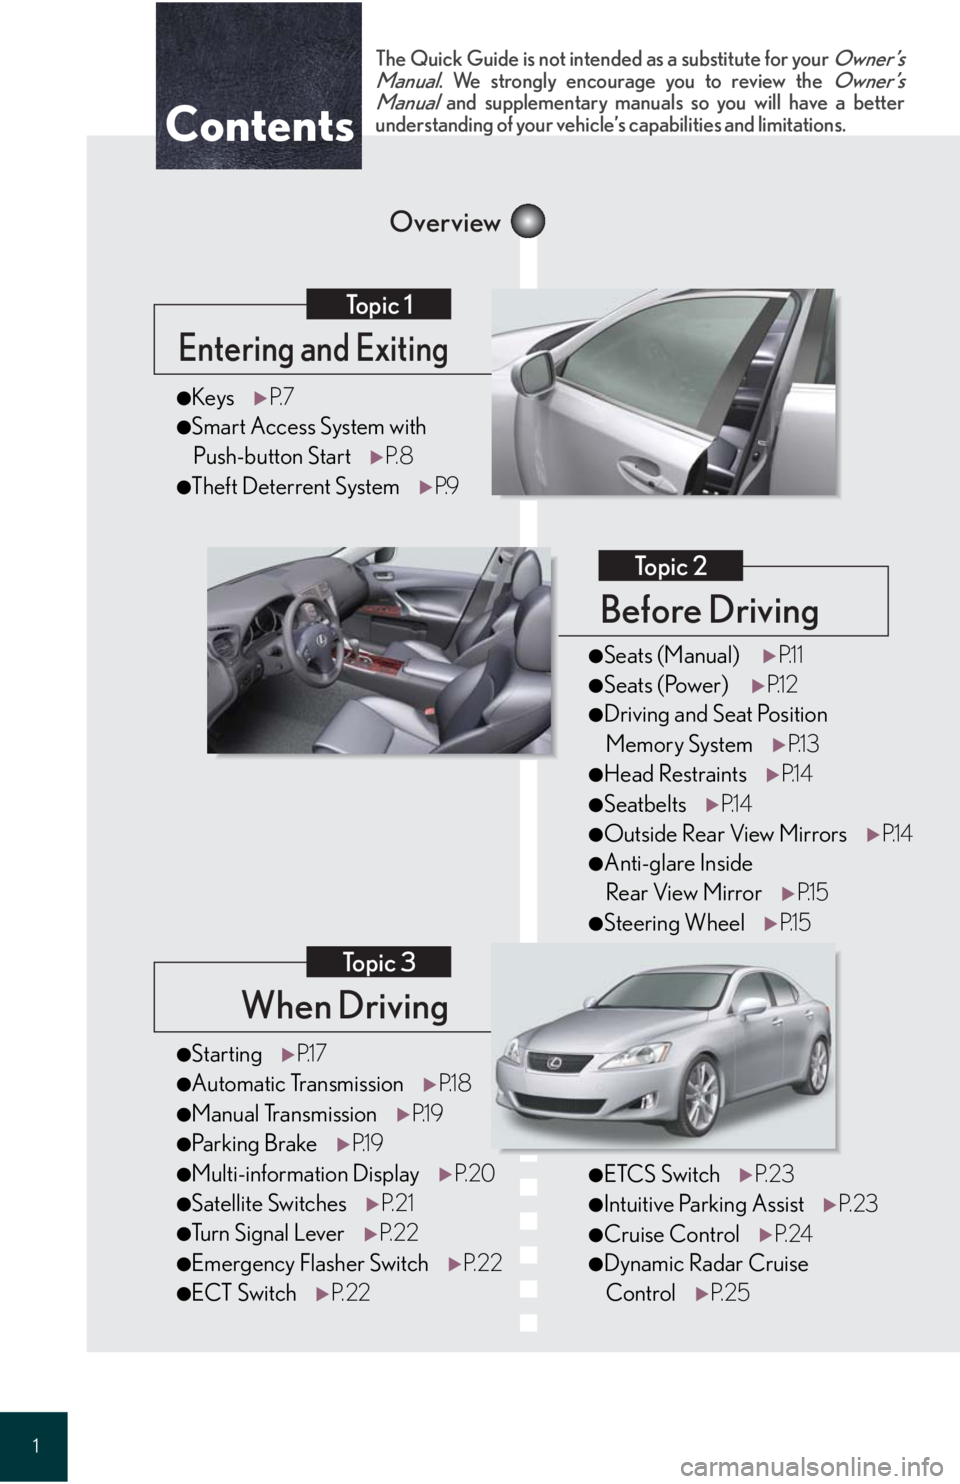 Lexus IS250 2008  Using the air conditioning system and defogger / LEXUS 2008 IS 350/250 QUICK GUIDE OWNERS MANUAL (OM60D81U) 1
When Driving
Topic 3
Entering and Exiting
Topic 1
Before Driving
Topic 2
Overview
Contents
●StartingP.1 7
●Automatic Transmission P.1 8
●Manual TransmissionP.1 9
●Parking BrakeP.1 9
●Multi